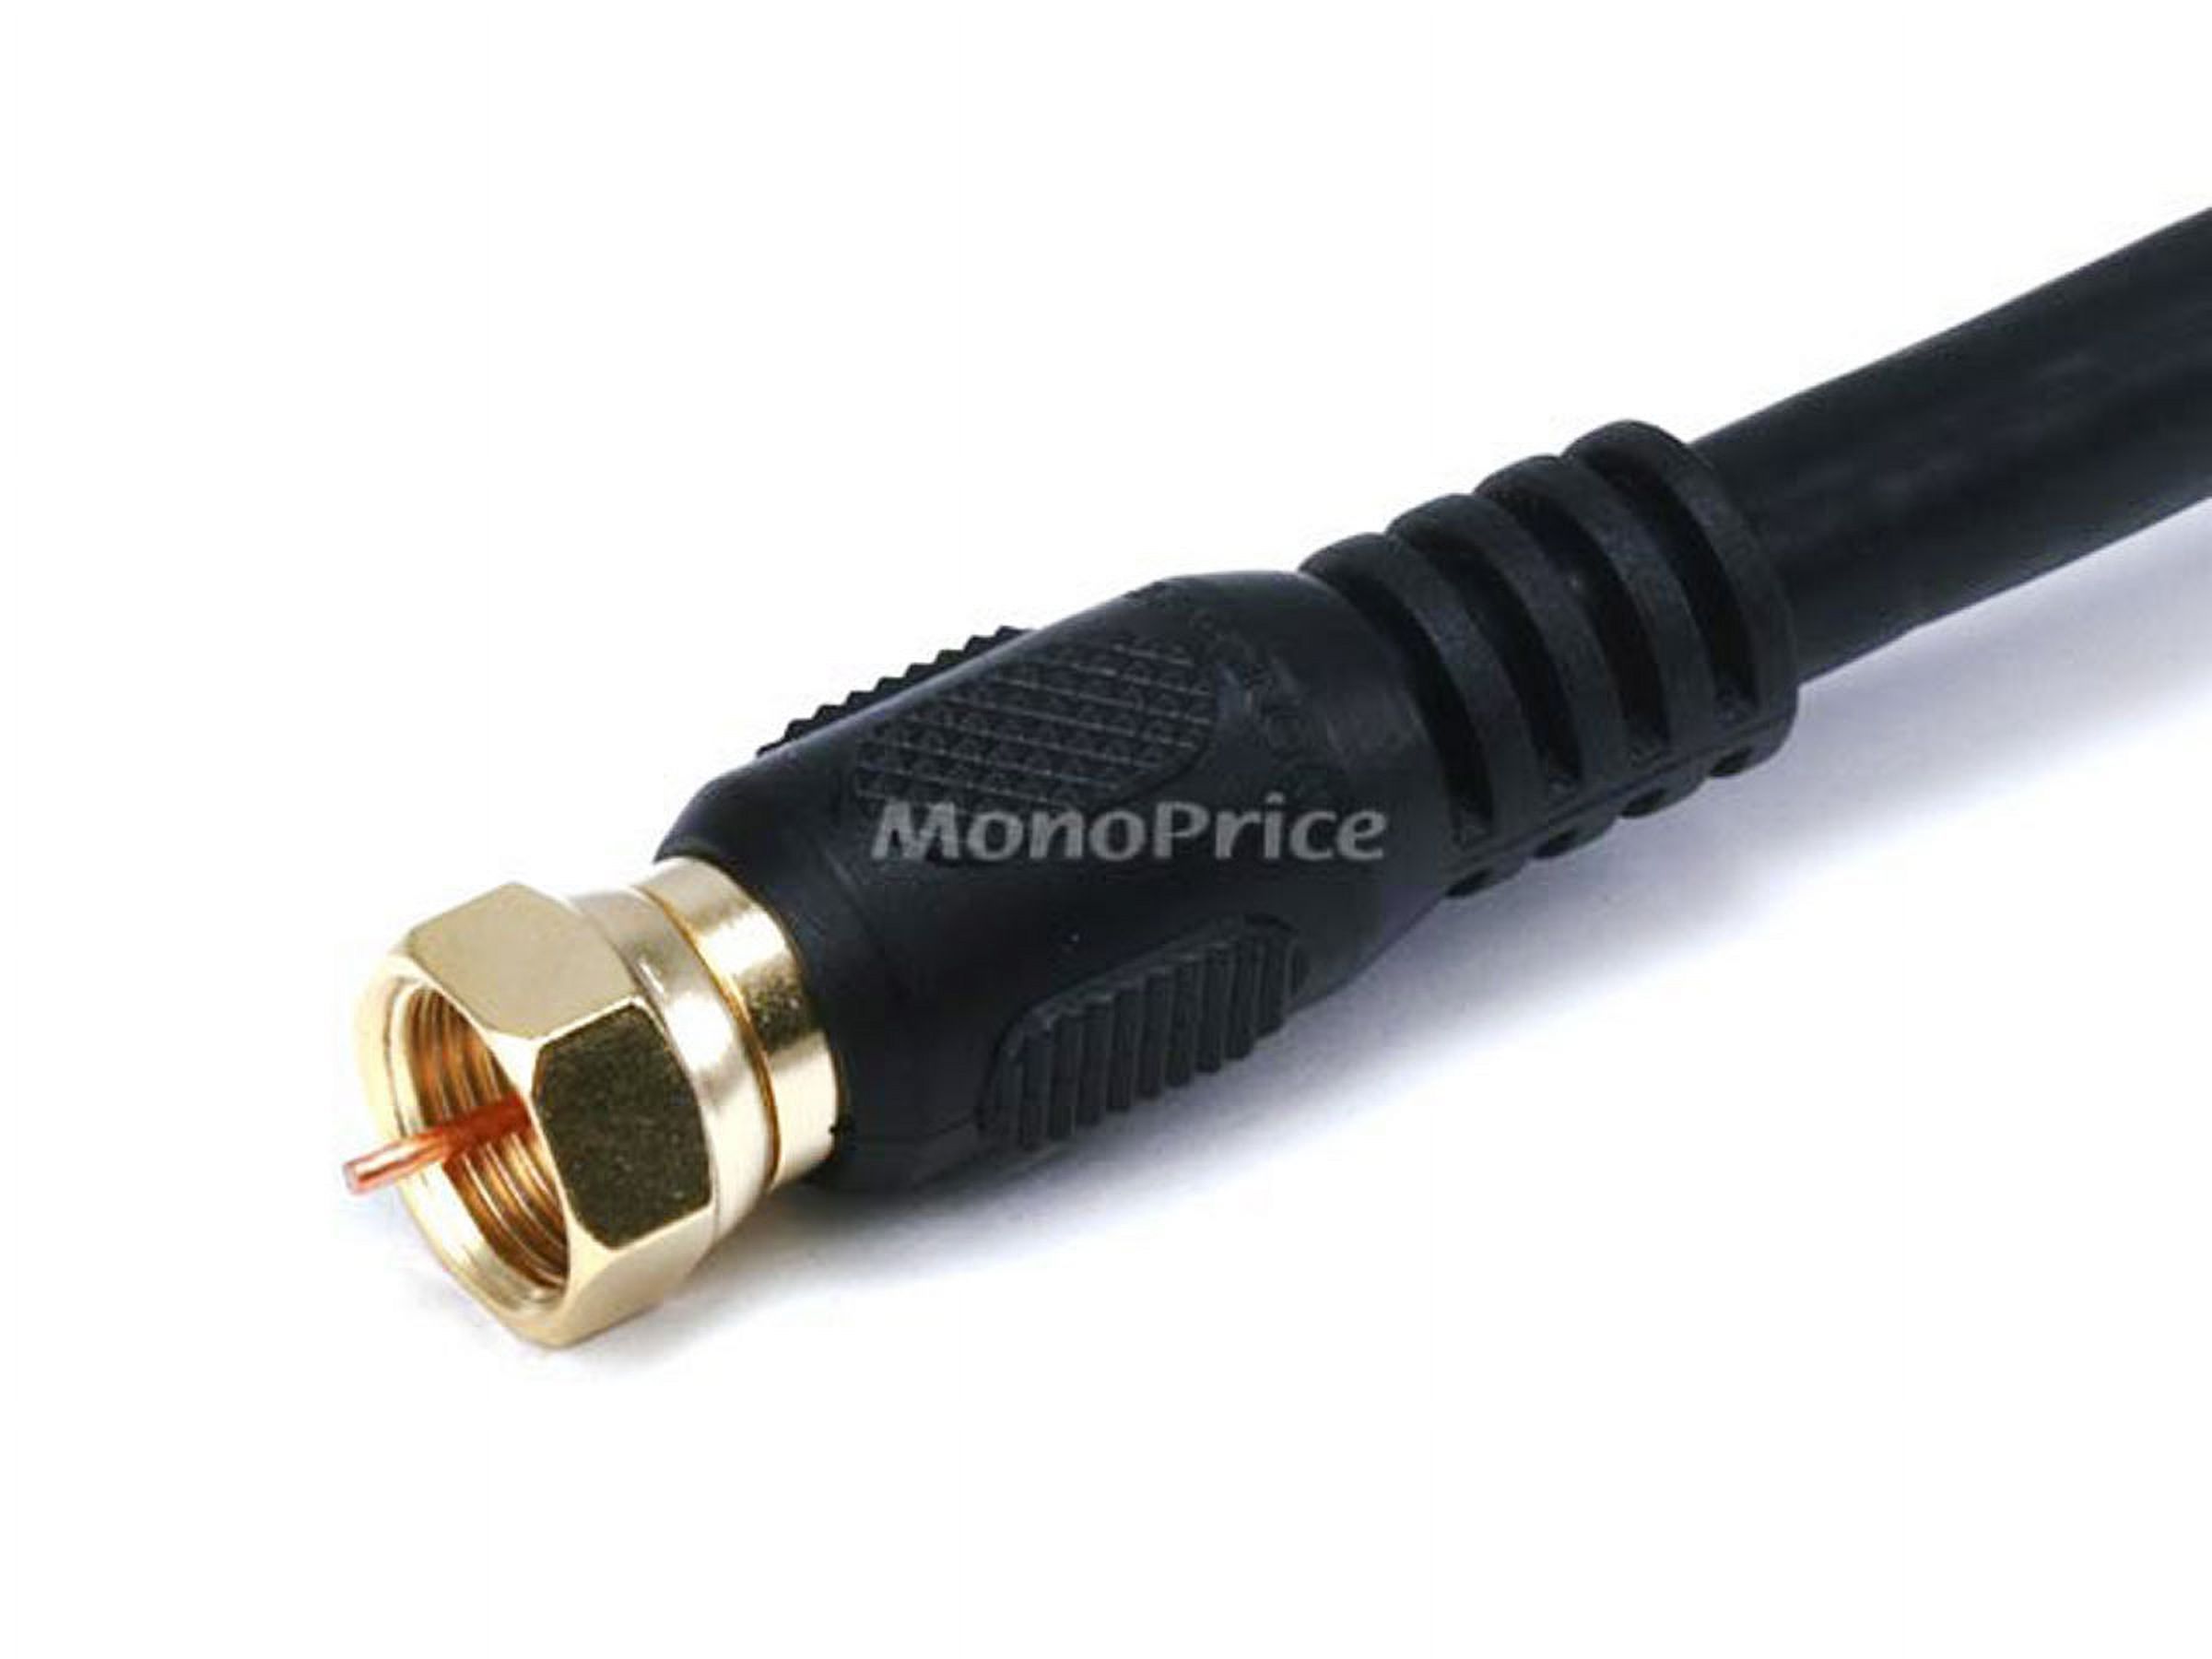 Monoprice 100' CL2 Quad Shielded RG6 F Type 18AWG Coaxial Cable Black 103035 - image 2 of 2